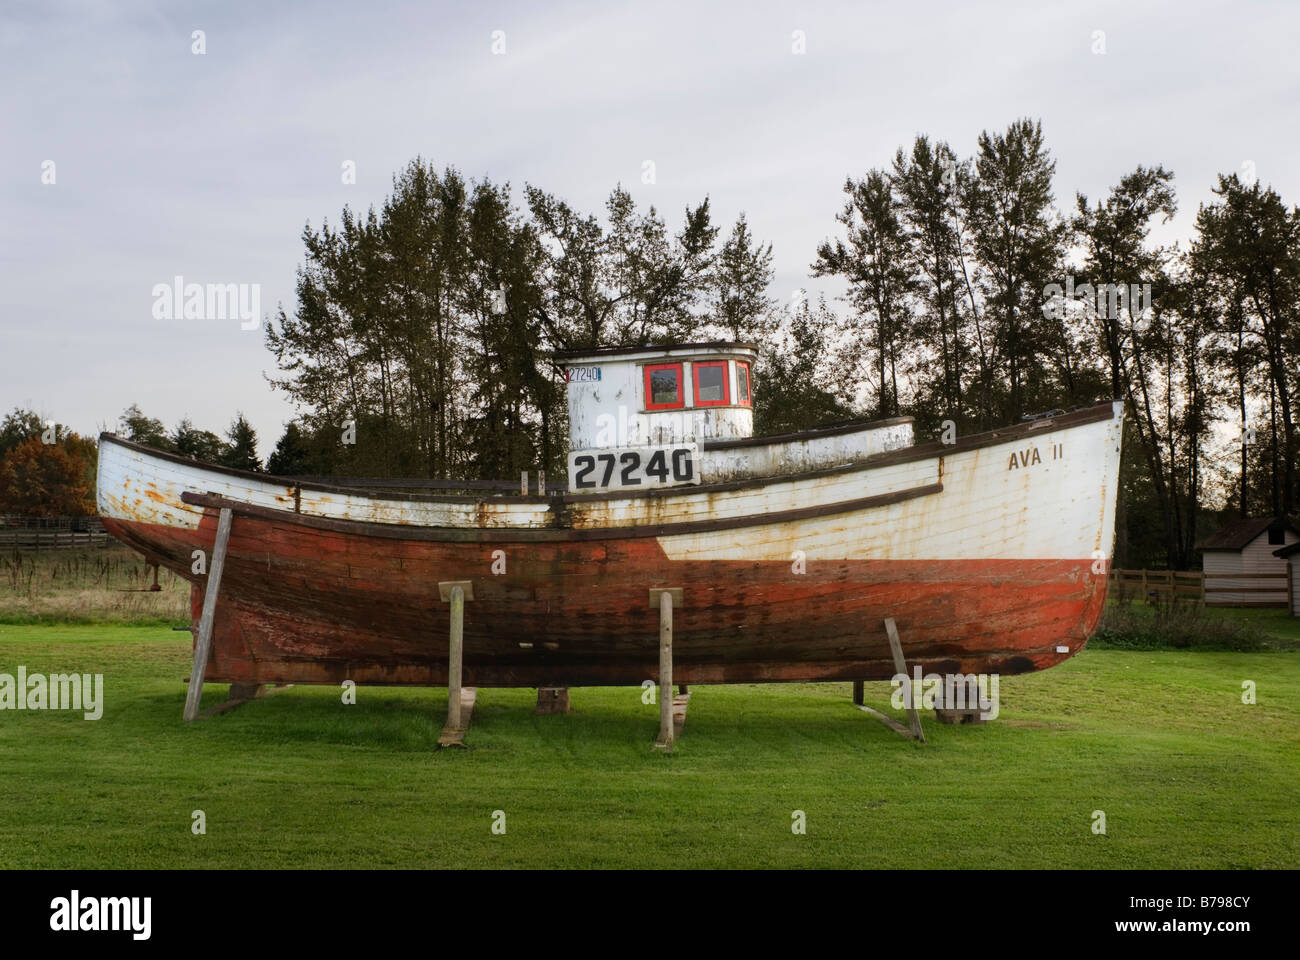 Old fishing boat in field South Surrey British Columbia Canada Stock Photo